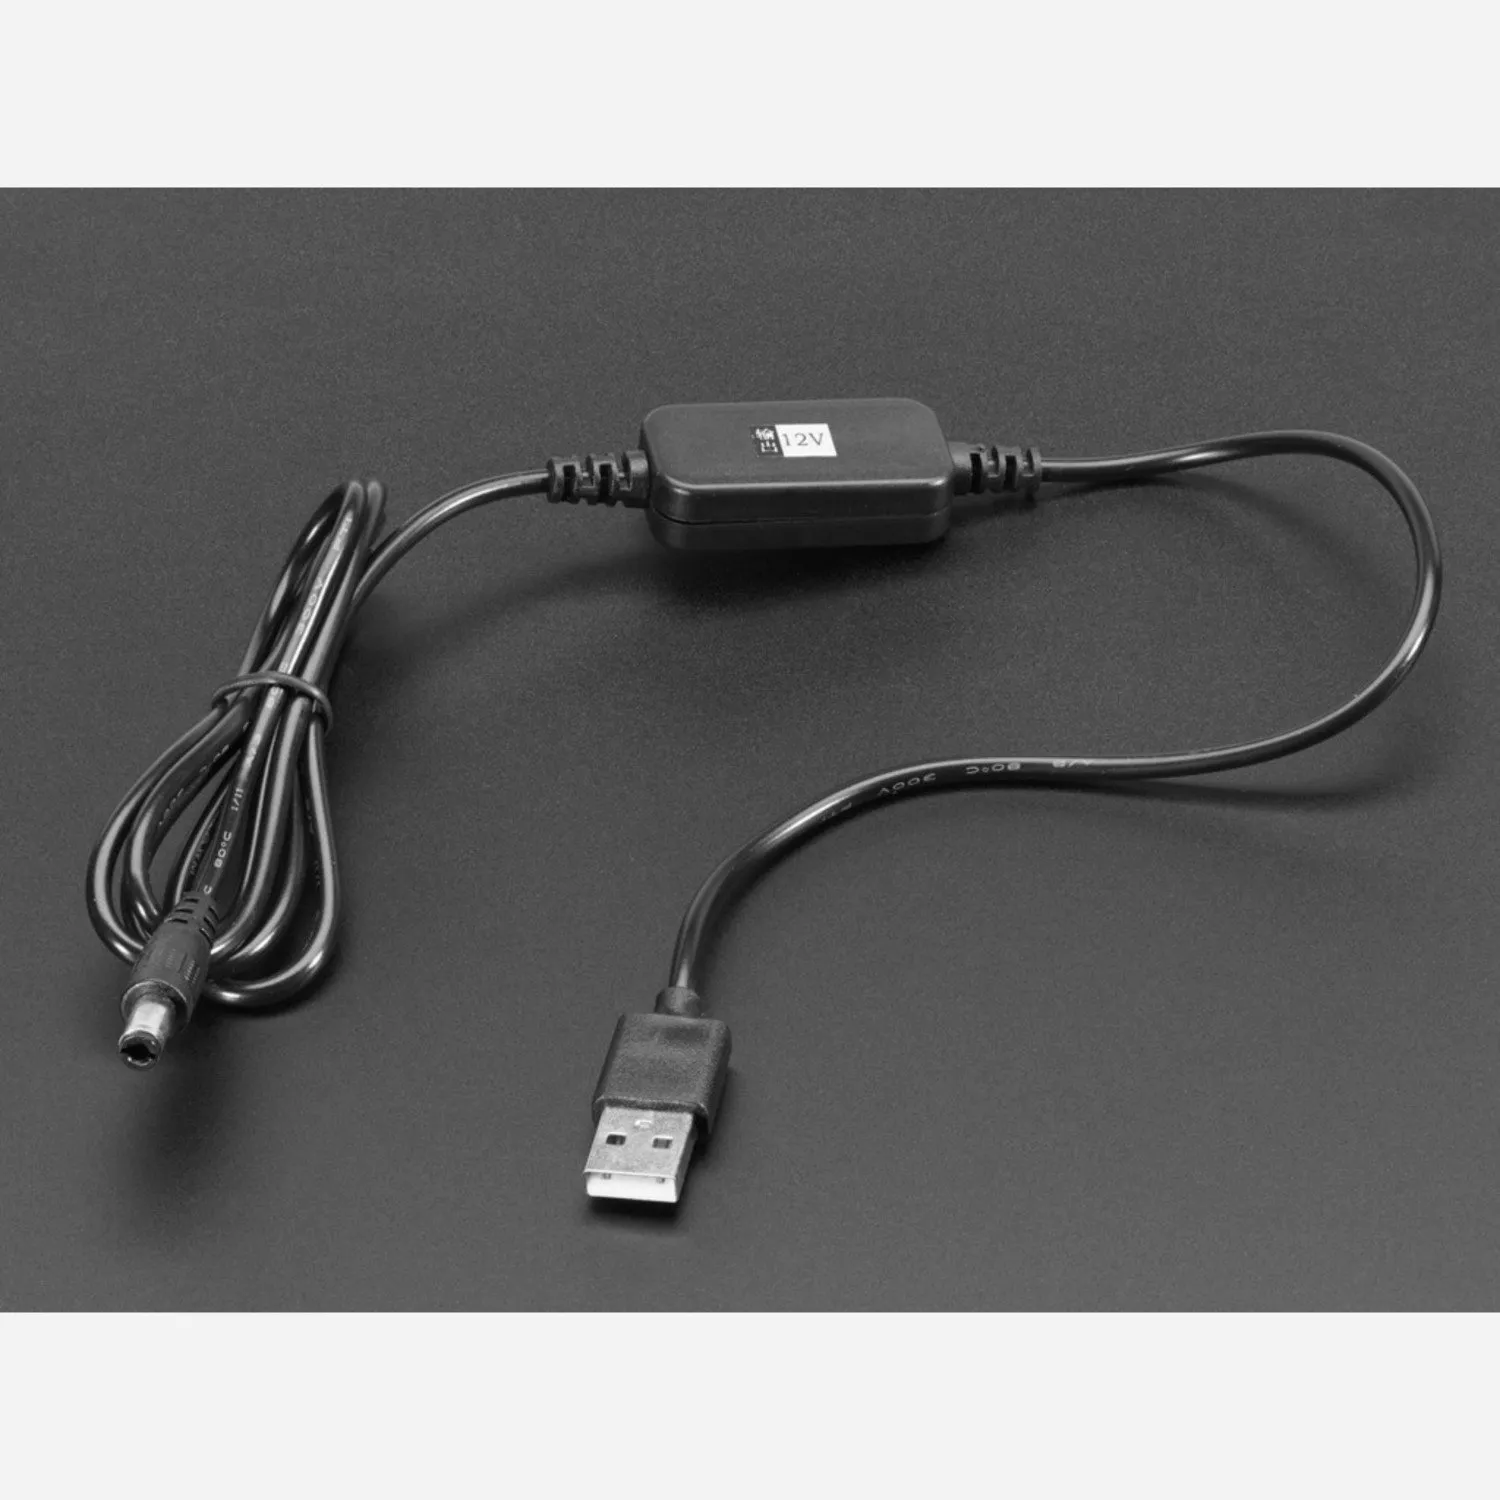 Photo of USB to 2.1mm DC Booster Cable - 12V